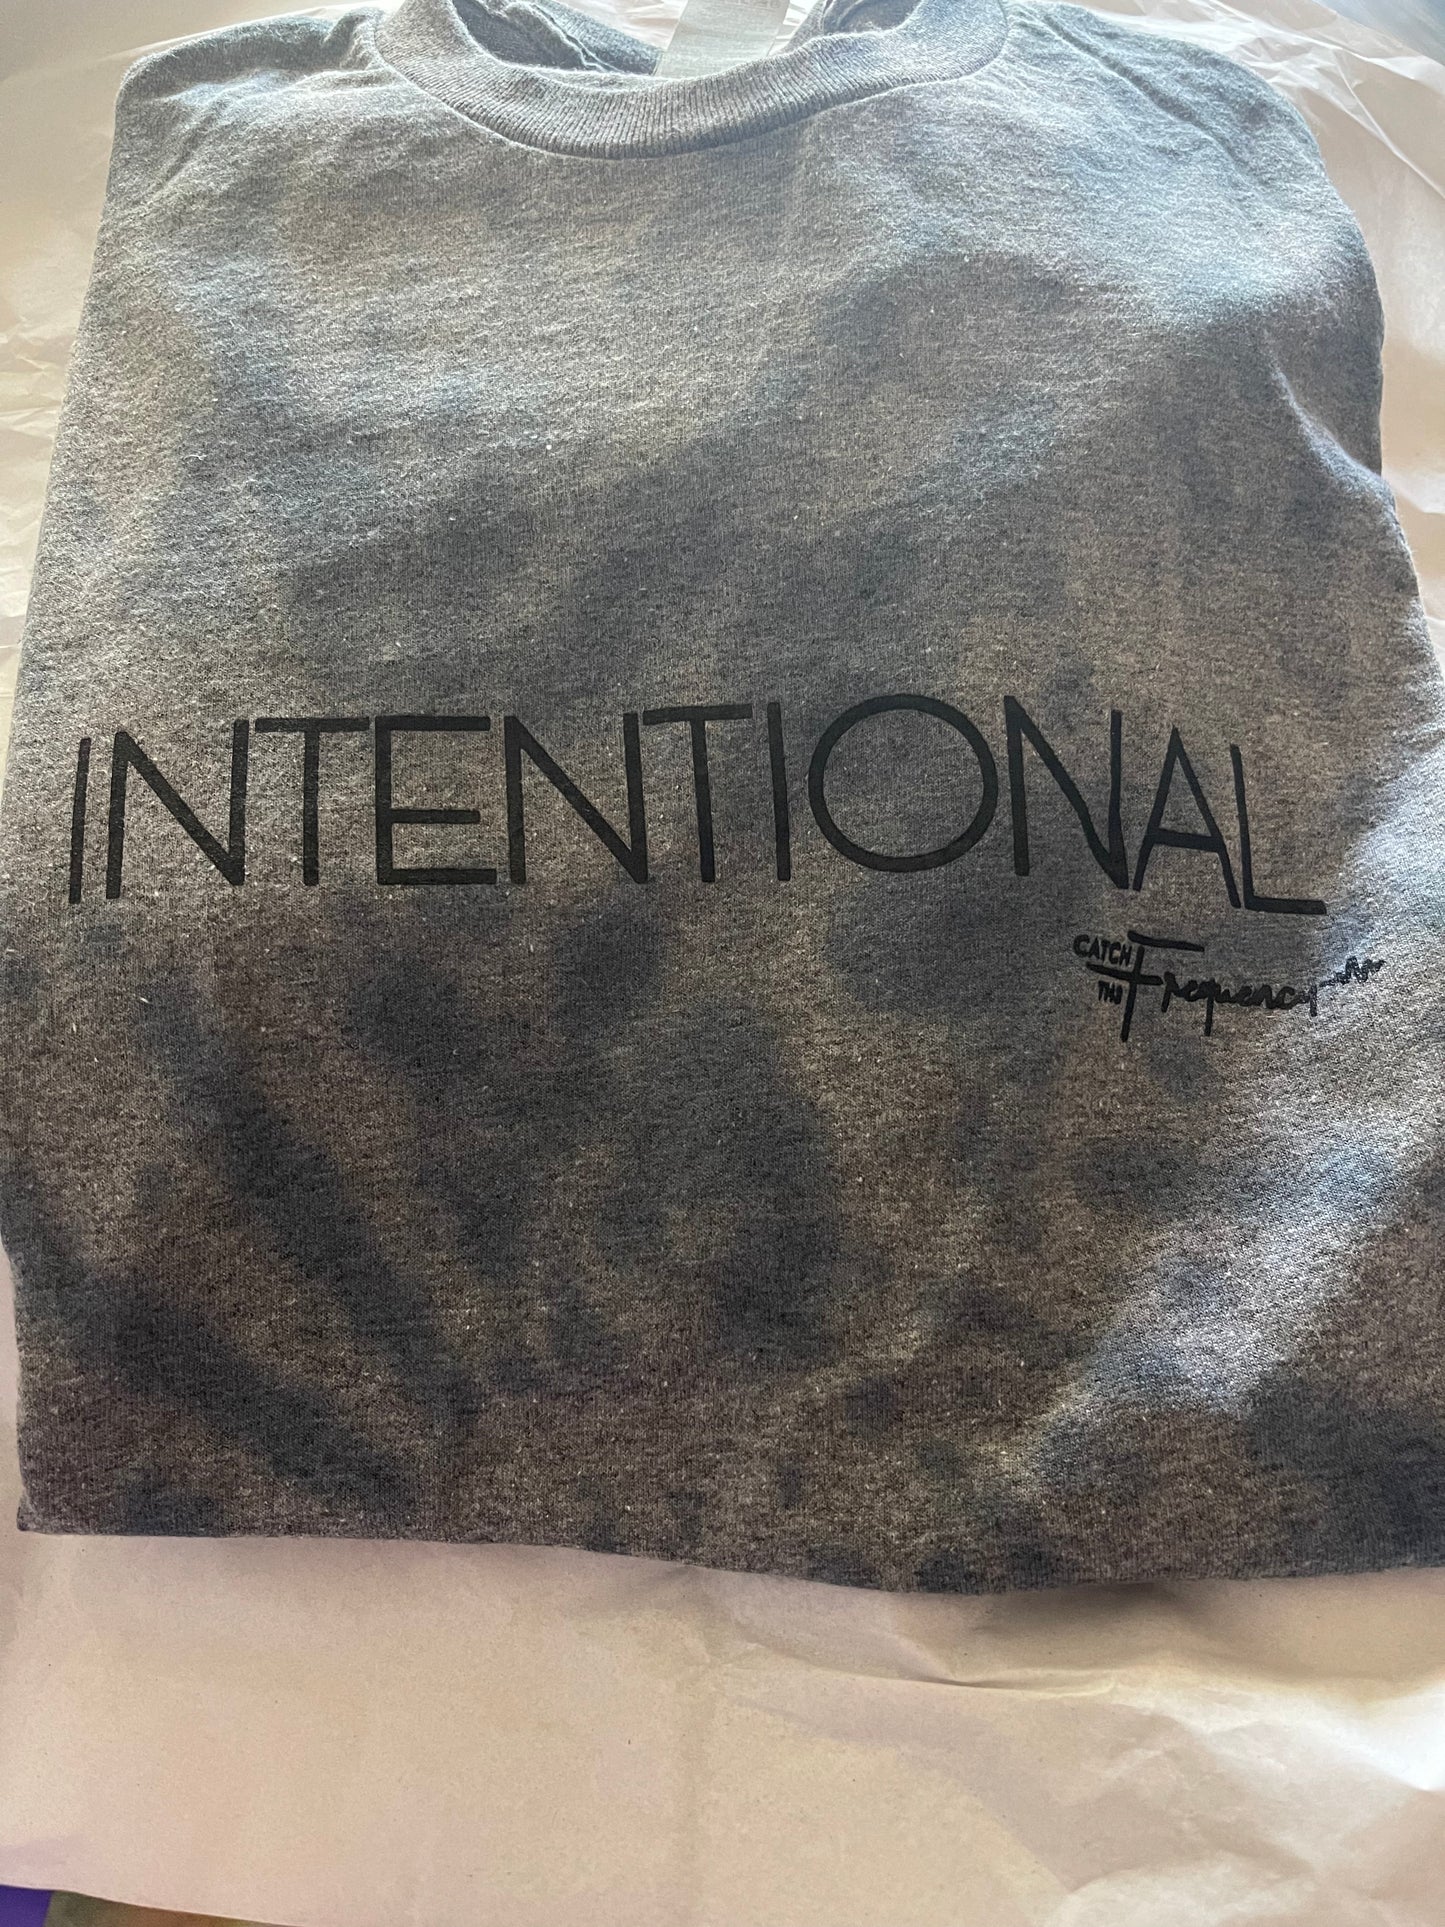 th3 intention (short sleeve)